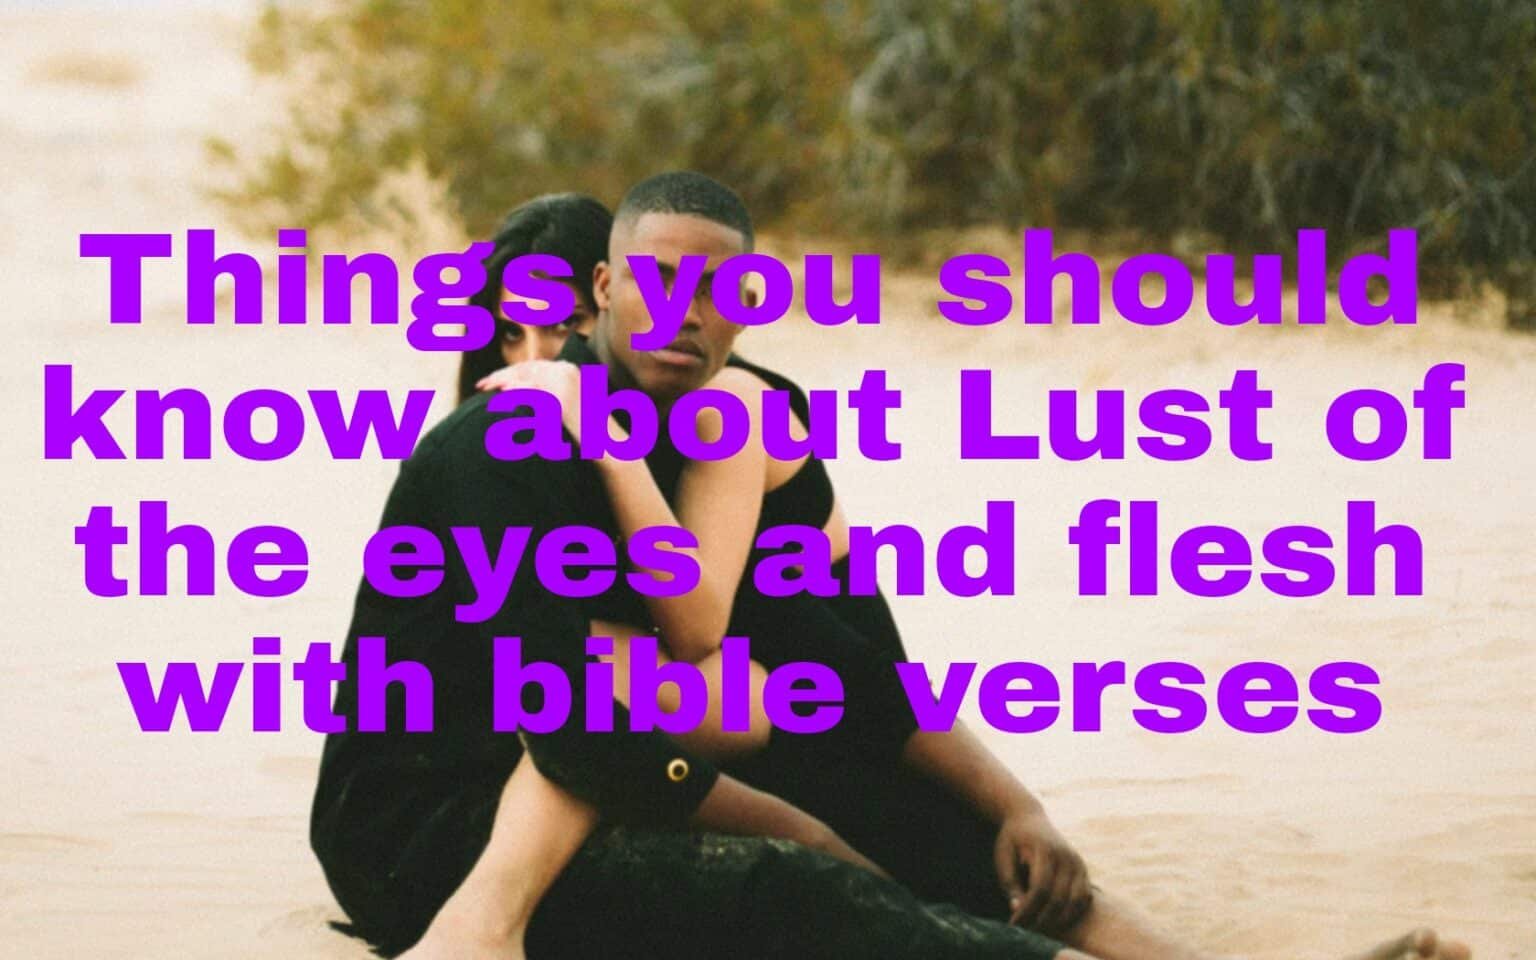 Things you should know about Lust of the eyes and flesh with bible verses